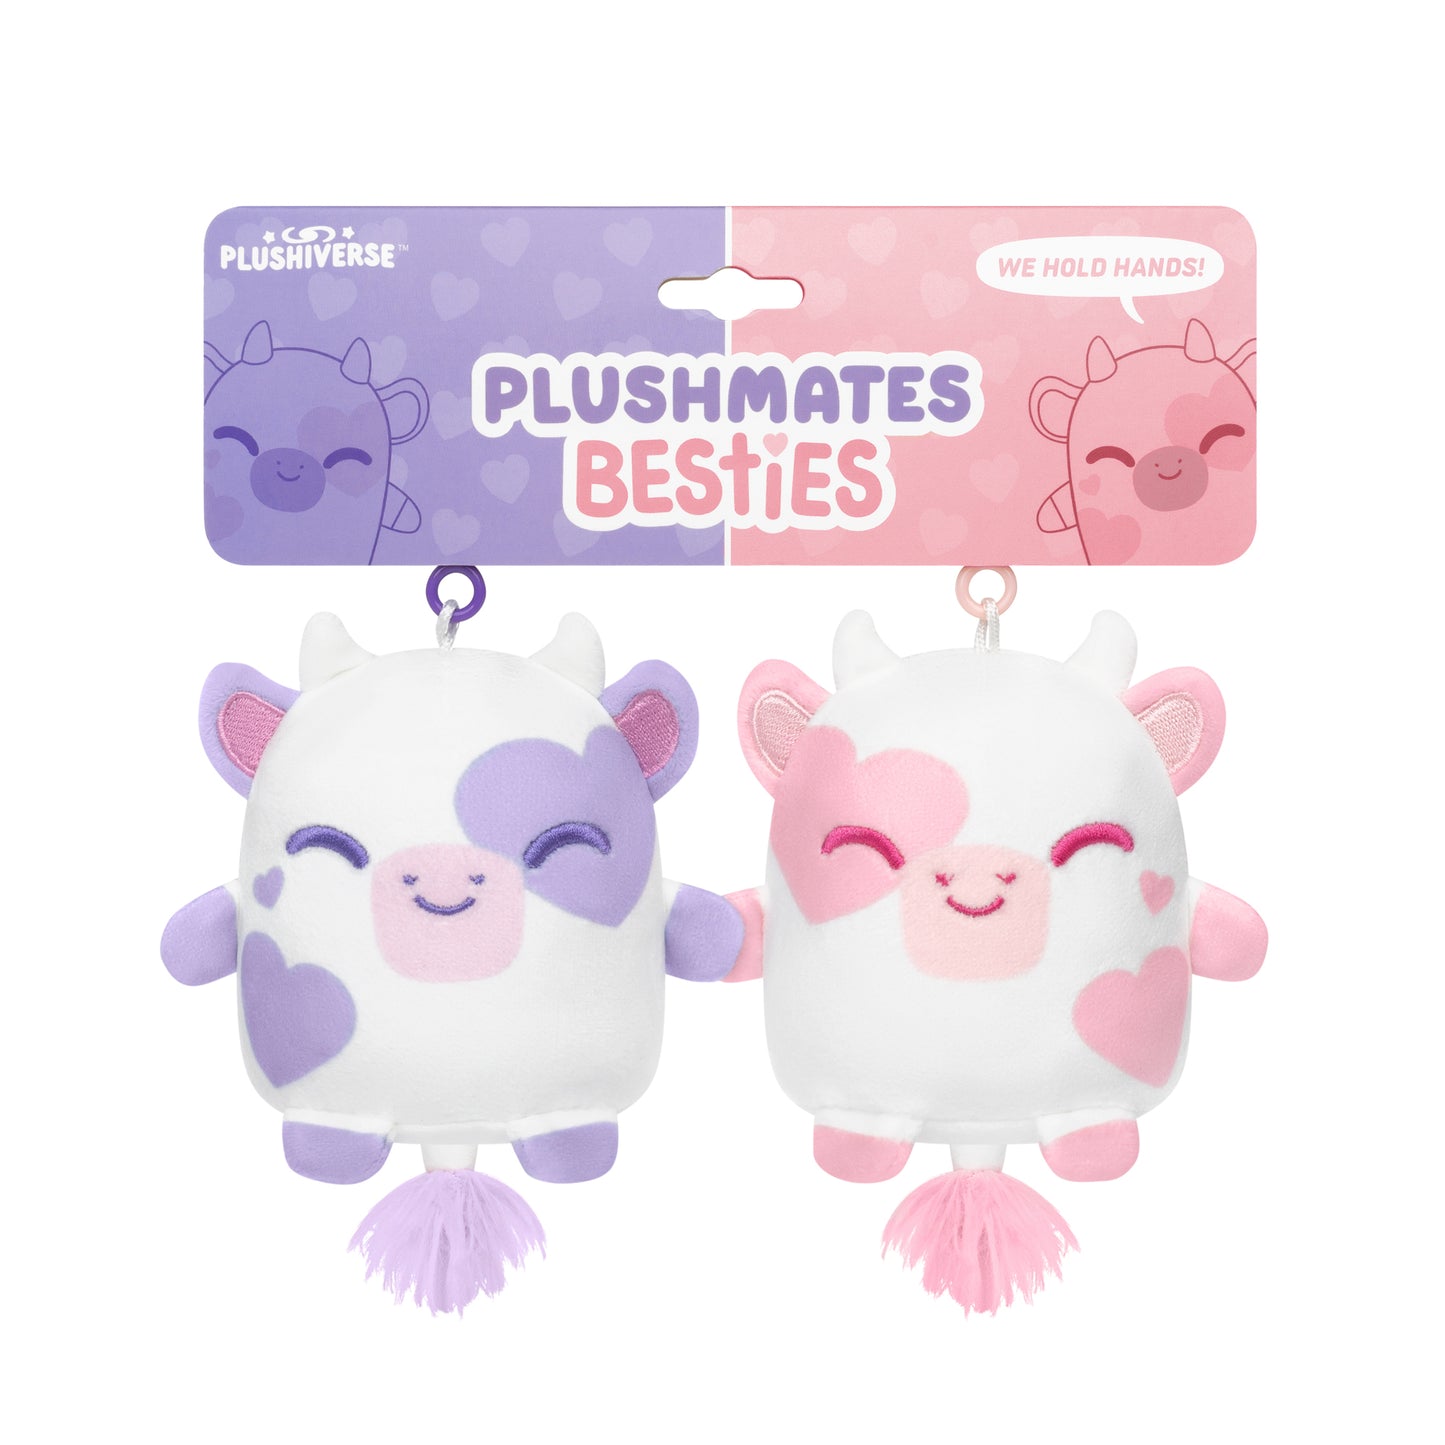 Two Plushiverse I Love Moo Plushmates Besties pink and white plush keychains with hearts on them, featuring magnetic hands for easy attachment from TeeTurtle.